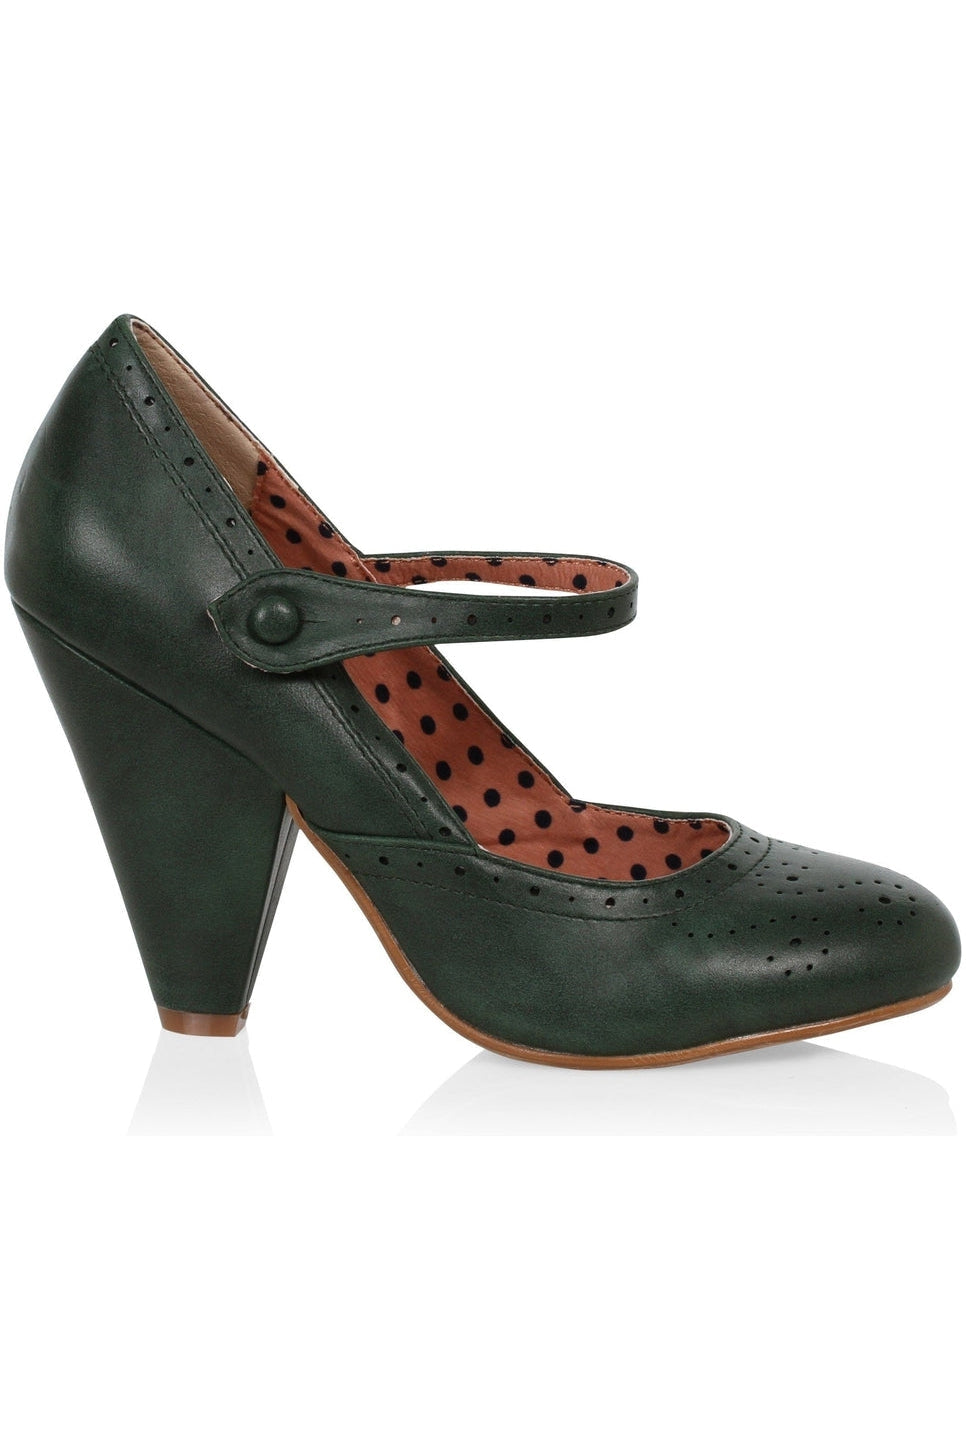 Bettie Page Elanor Mary Jane | Green Faux Leather-Mary Janes-Bettie Page by Ellie-SEXYSHOES.COM